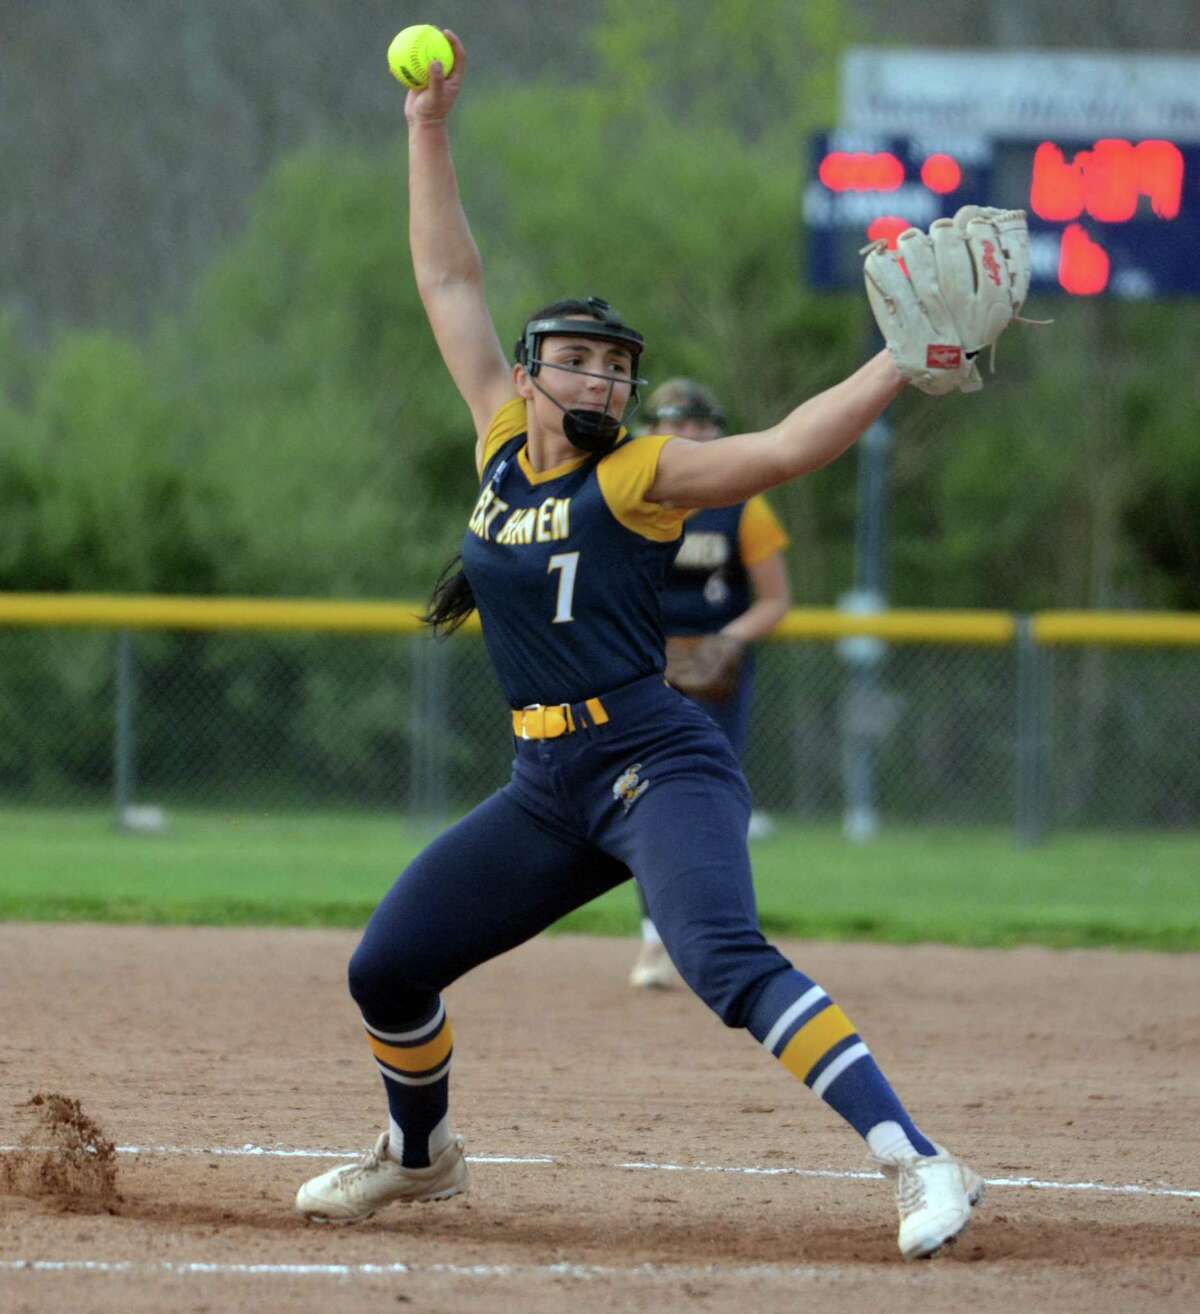 East Haven and Emilee Bishop may have revenge on their minds if they meet up with Masuk in the Class L semifinals, after losing to the Panthers in the semis last year and in the championship game in 2019.